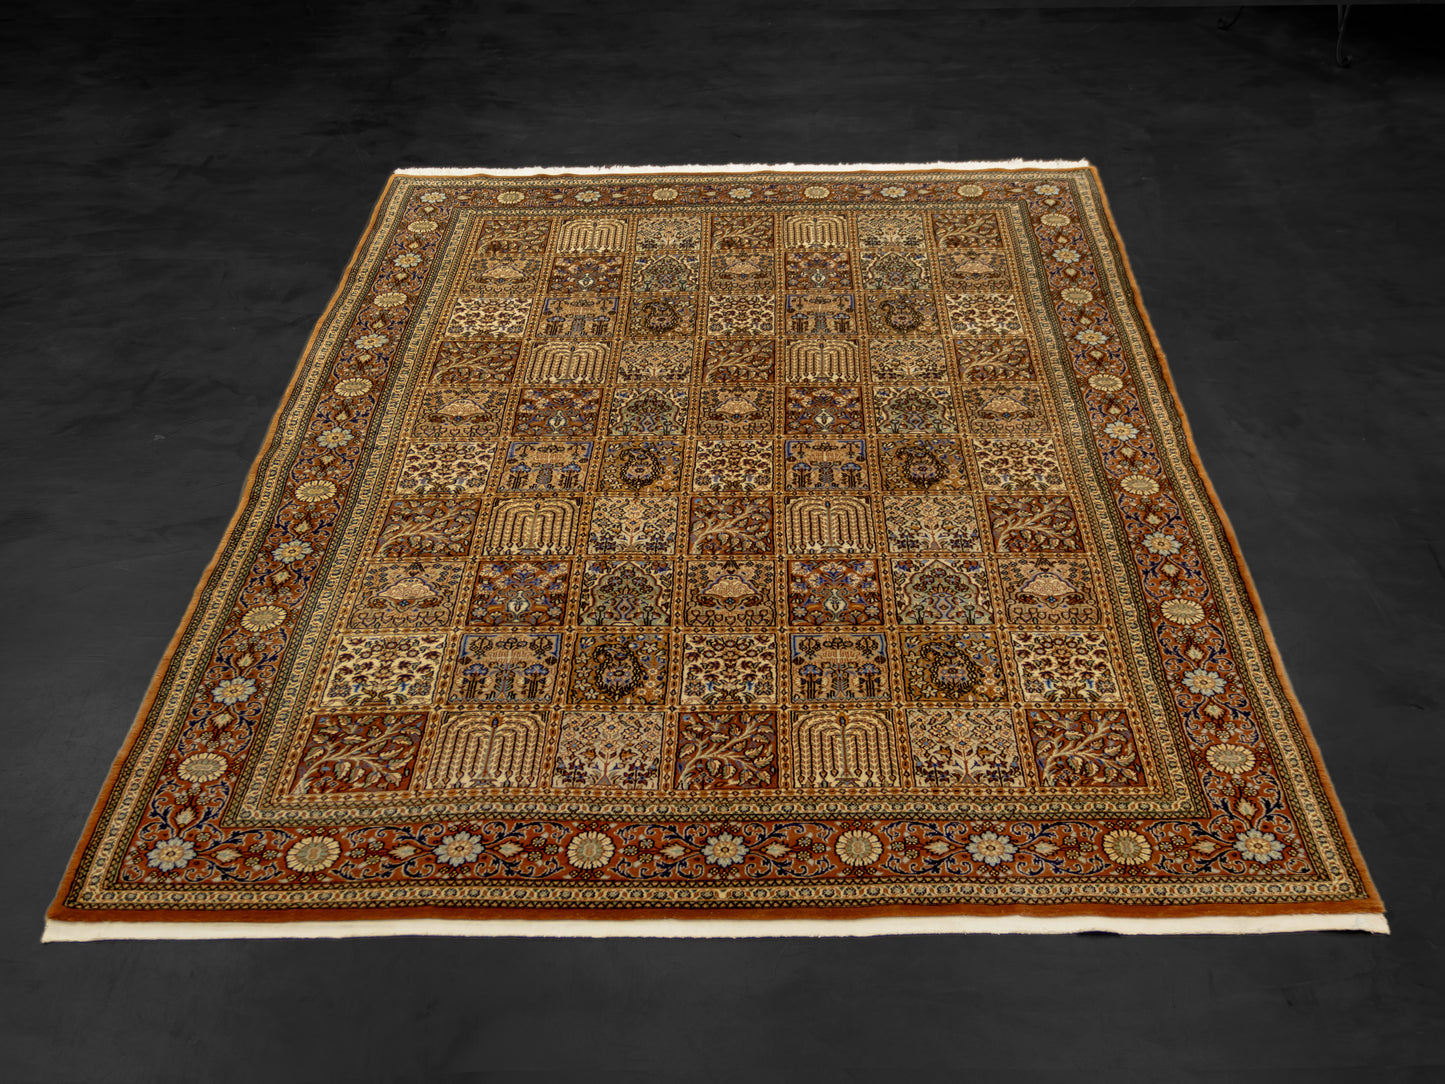 Hand-knotted Persian Wool Brown Rug "4 seasons" product image #29703128318122